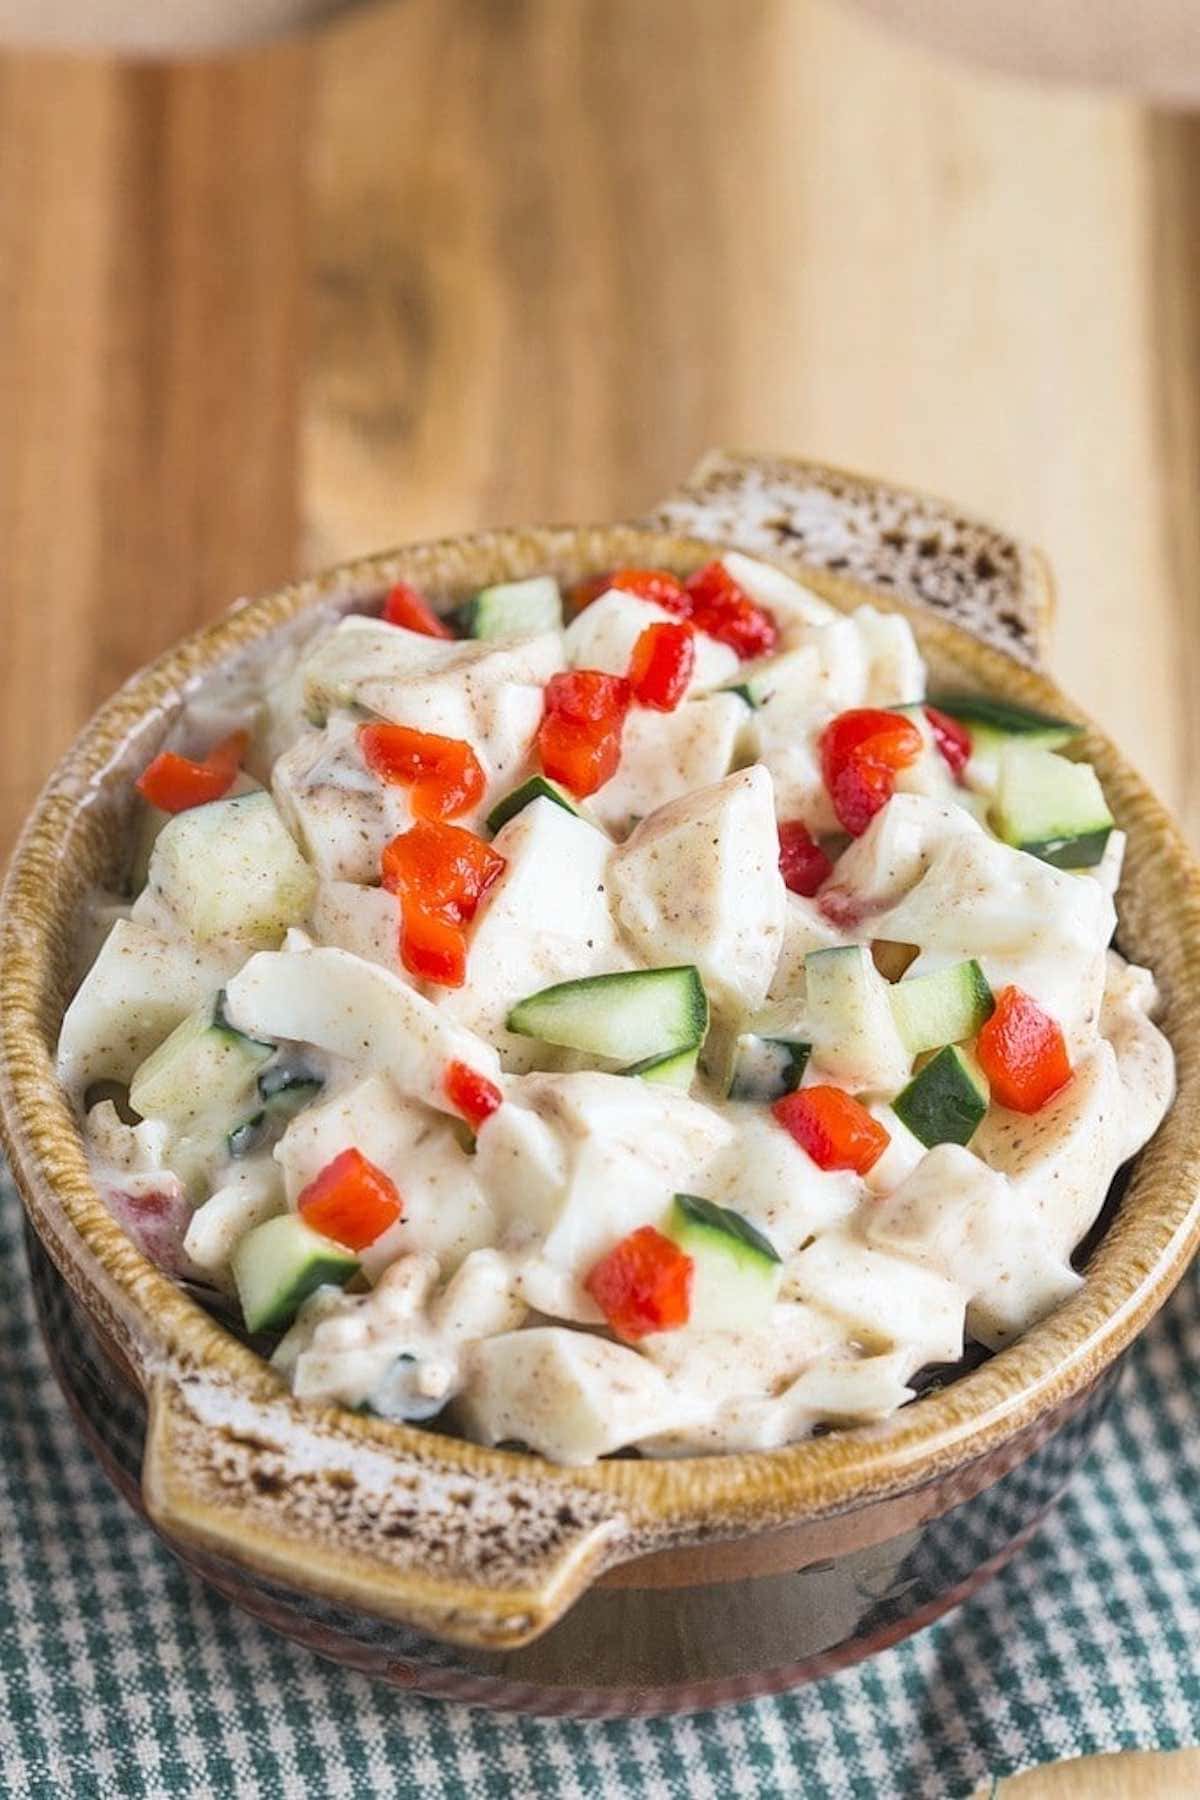 creamy egg white salad with low calorie salad dressing.